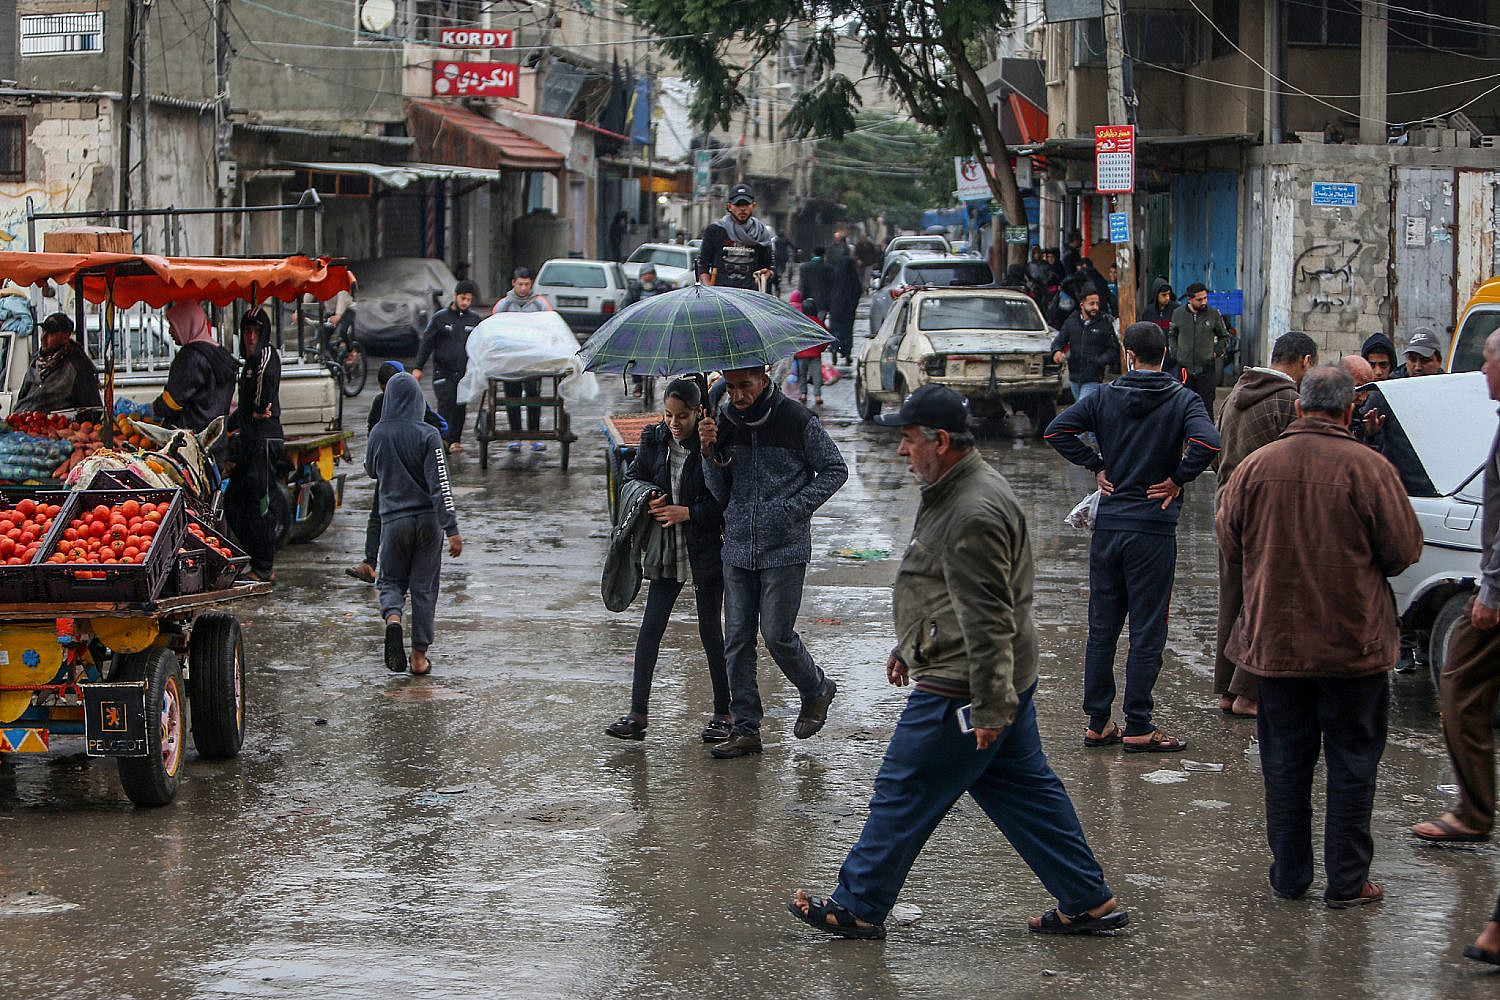 Palestinians during a rainy day on a street in Rafah refugee camp in the southern Gaza Strip, November 19, 2021. (Abed Rahim Khatib/Flash90)